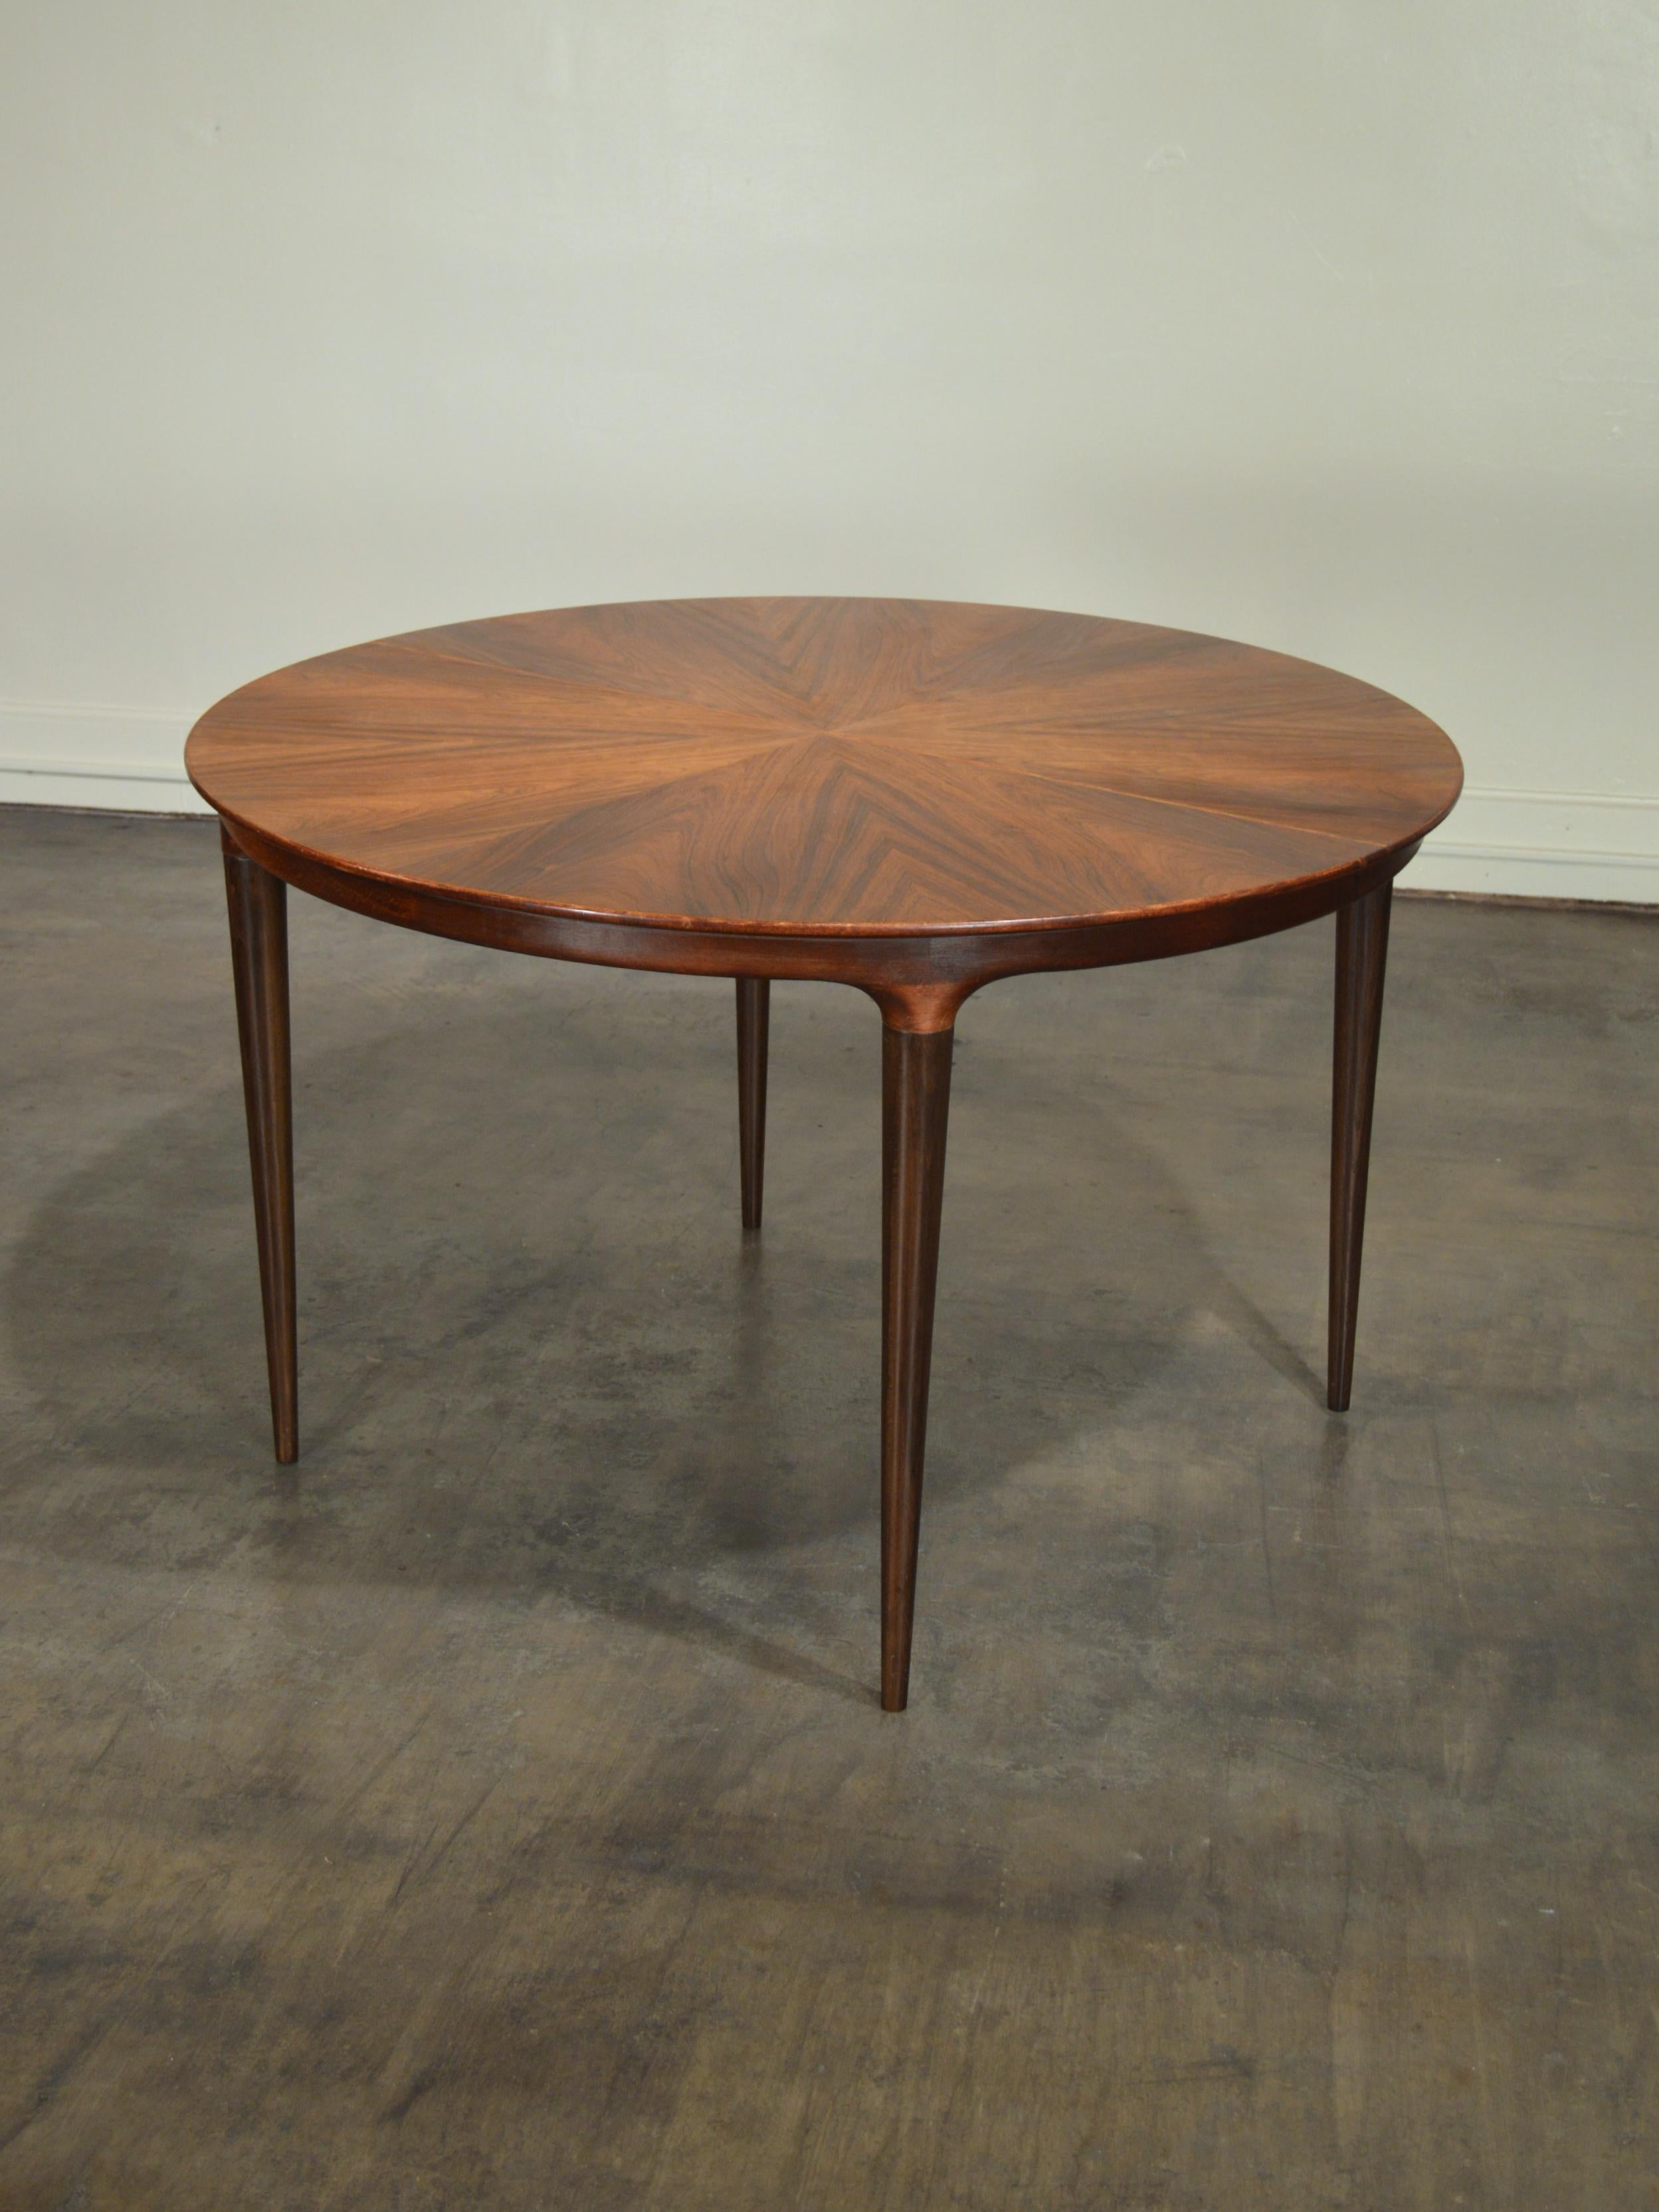 Brilliant Rosewood Cortina expanding dining table designed by Svante Skogh for Seffle Mobelfabrik of Sweden circa 1960. Table sits atop elegantly turned legs, appearing to nearly float off the floor. This uncommon design features a unique and